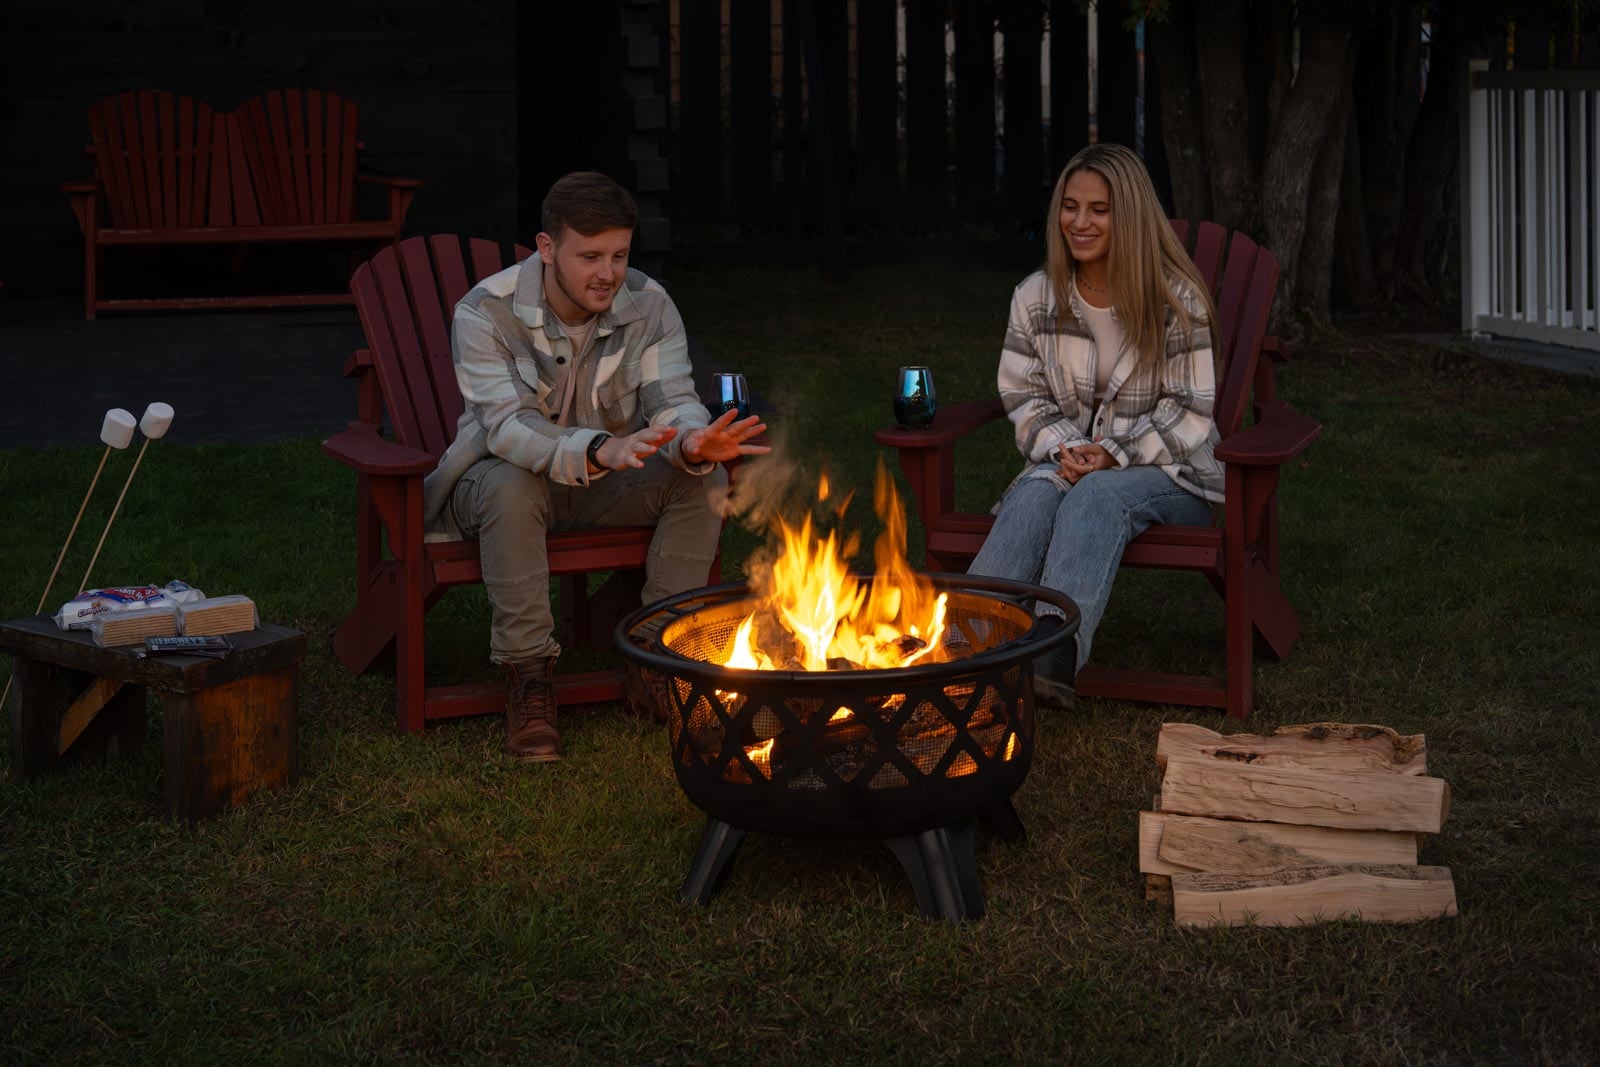 Two people sitting around a fire pit.